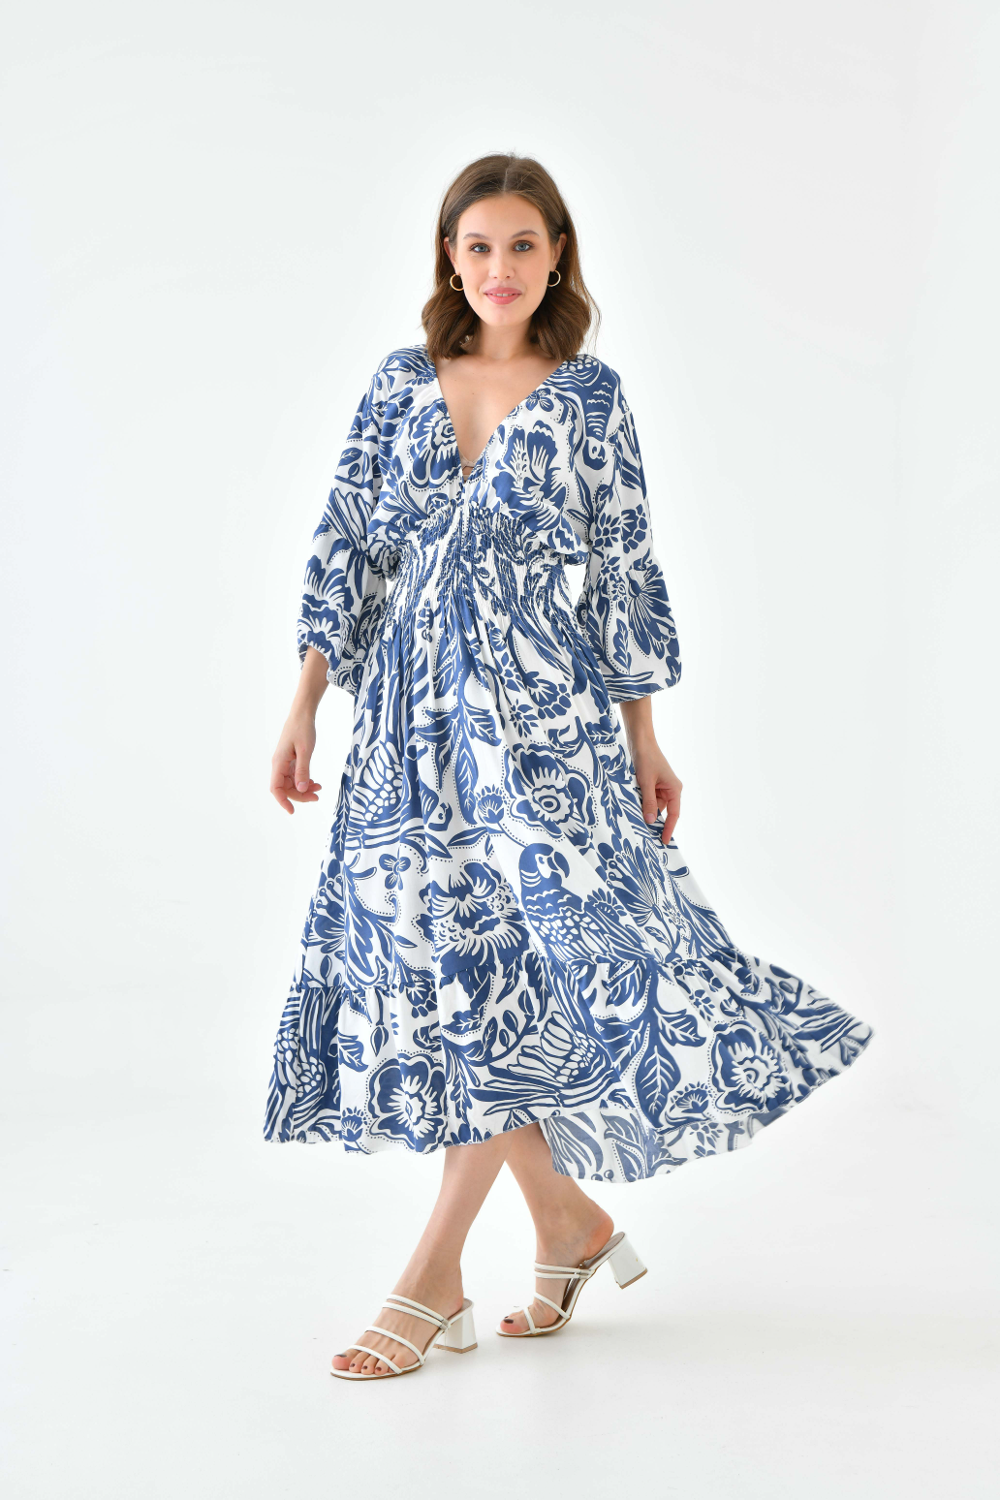 Oversized Flutter Sleeves Shirred Waist V Neck Midi Dress With Floral Print In Navy And White 0191MIDIDRESSNAVY